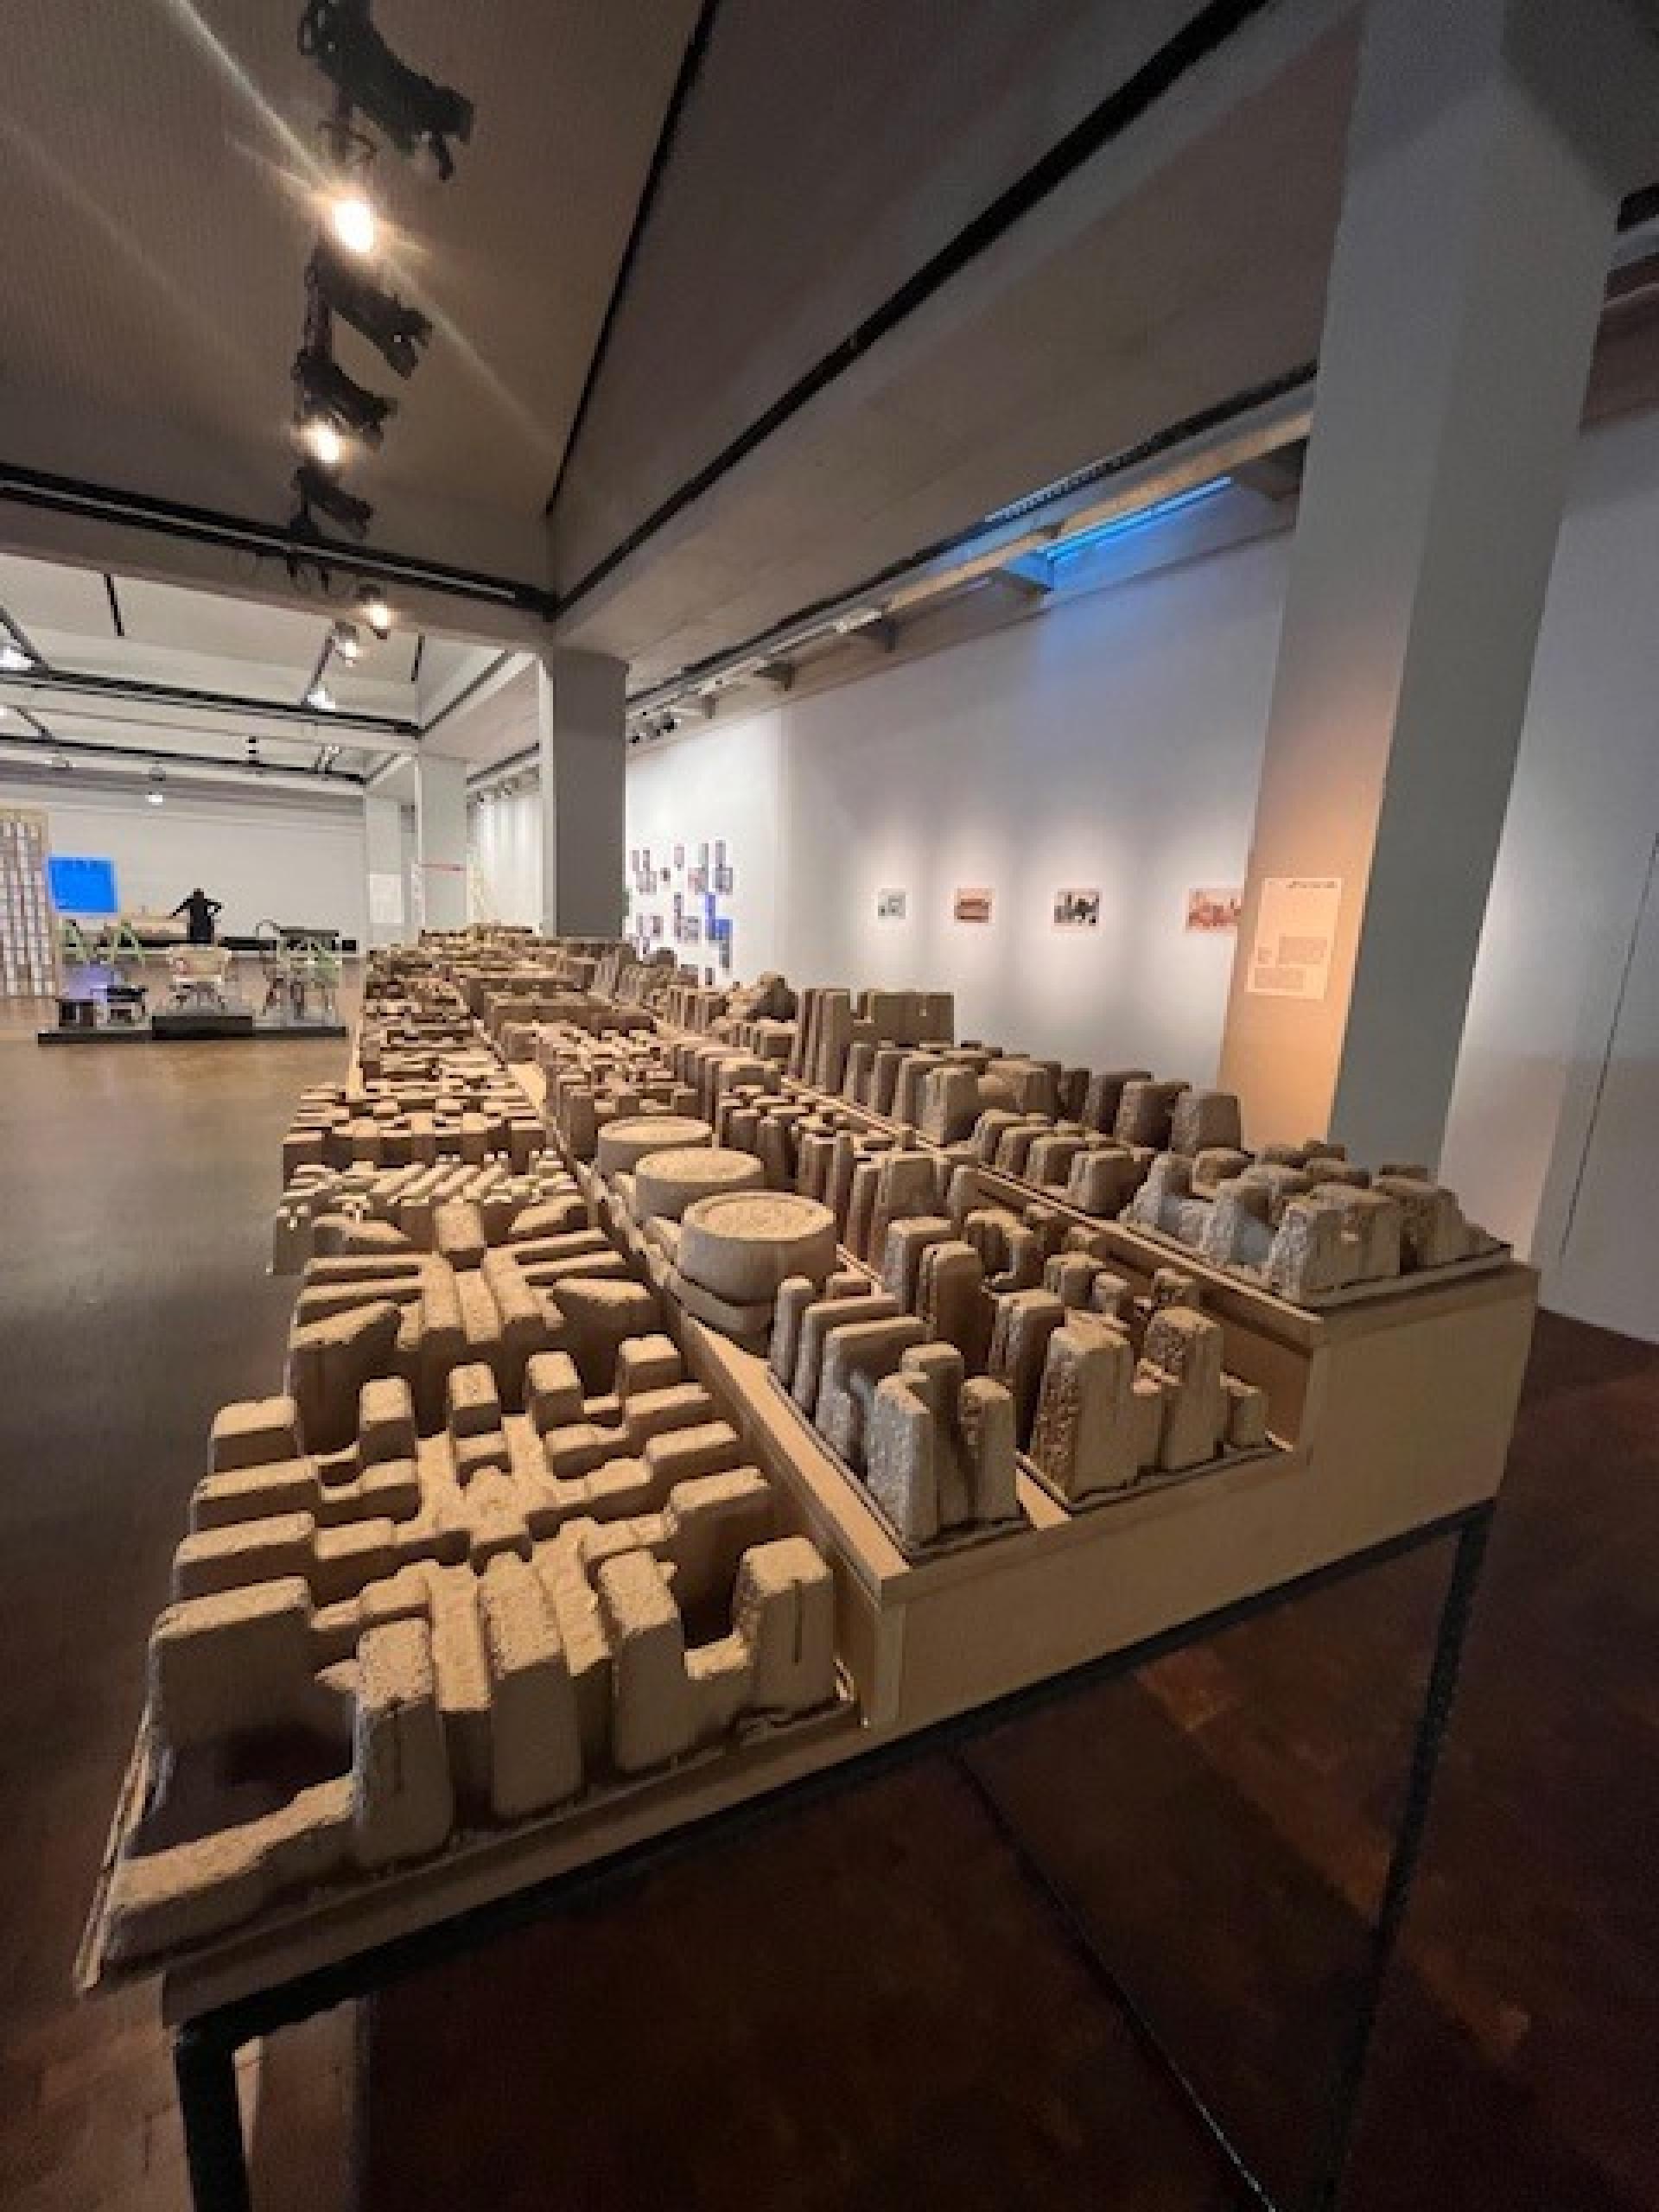 Kader Attia, Hypomnemata, 2023, Attia argues that the aesthetics of modernism, from architecture to everyday objects like packaging materials, reflect processes of cultural appropriation.© Kader Attia. © VG Bild-Kunst, Bonn 2023